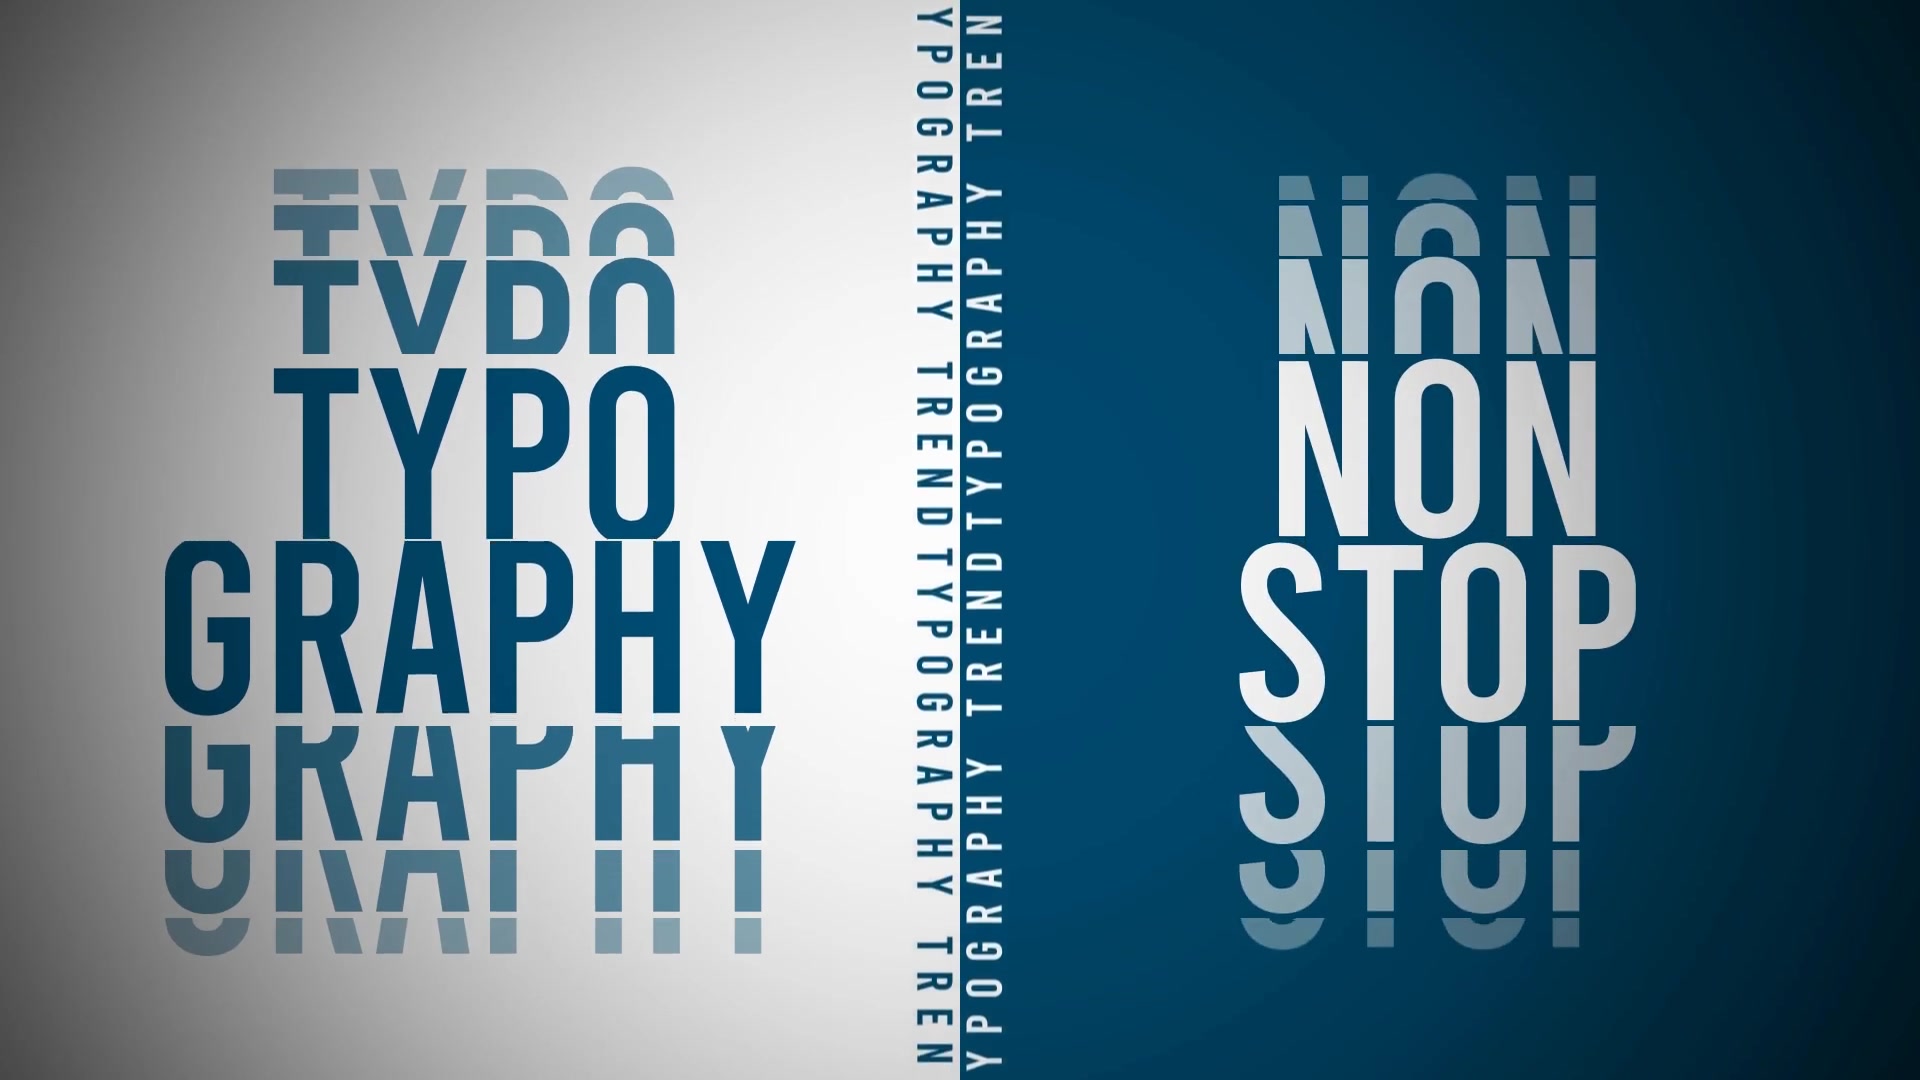 kinetic typography after effects alternative